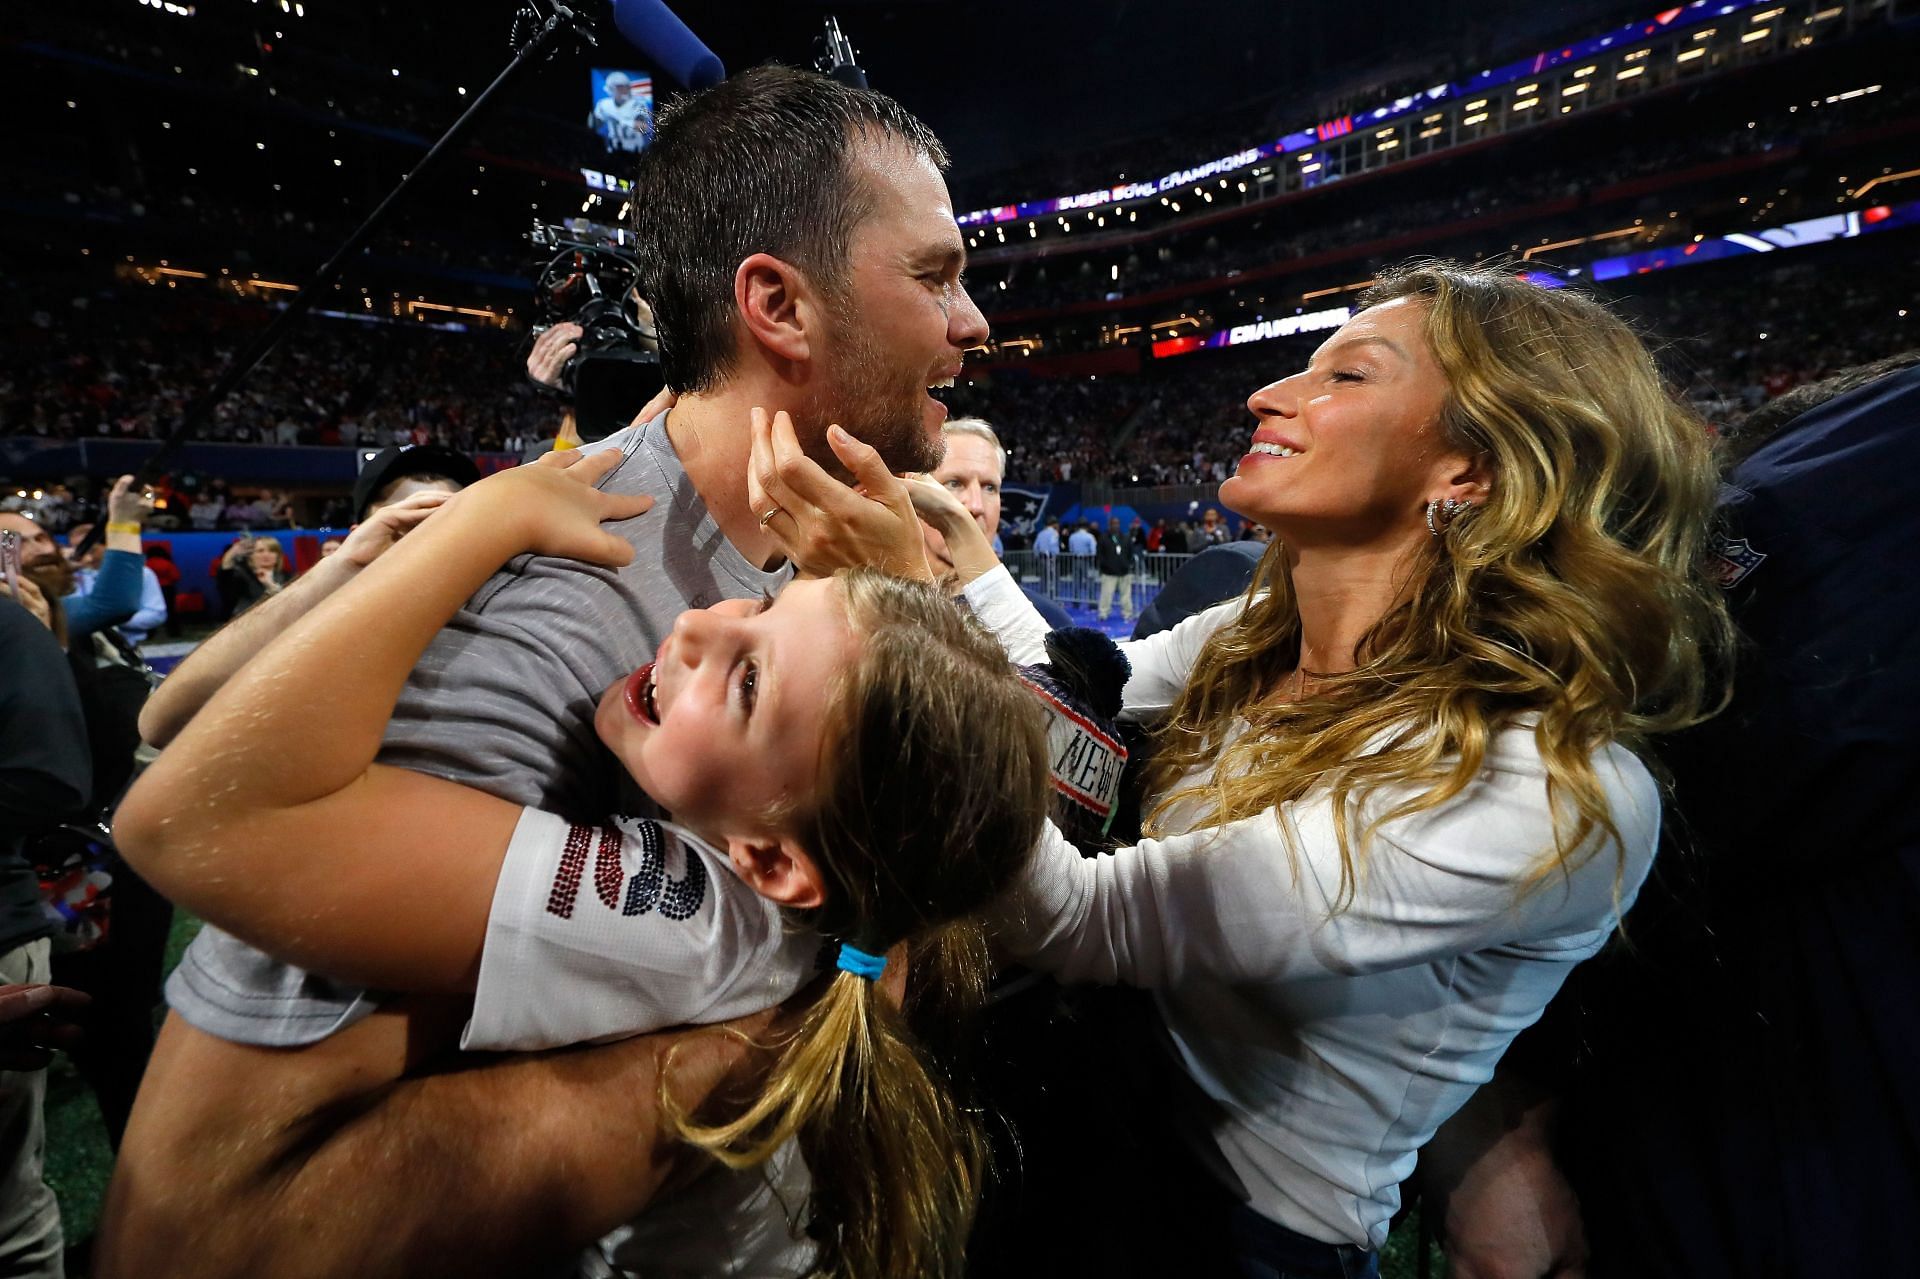 Tom Brady and Gisele B&uuml;ndchen at the Super Bowl LIII - New England Patriots v Los Angeles Rams (Image via Getty Images)